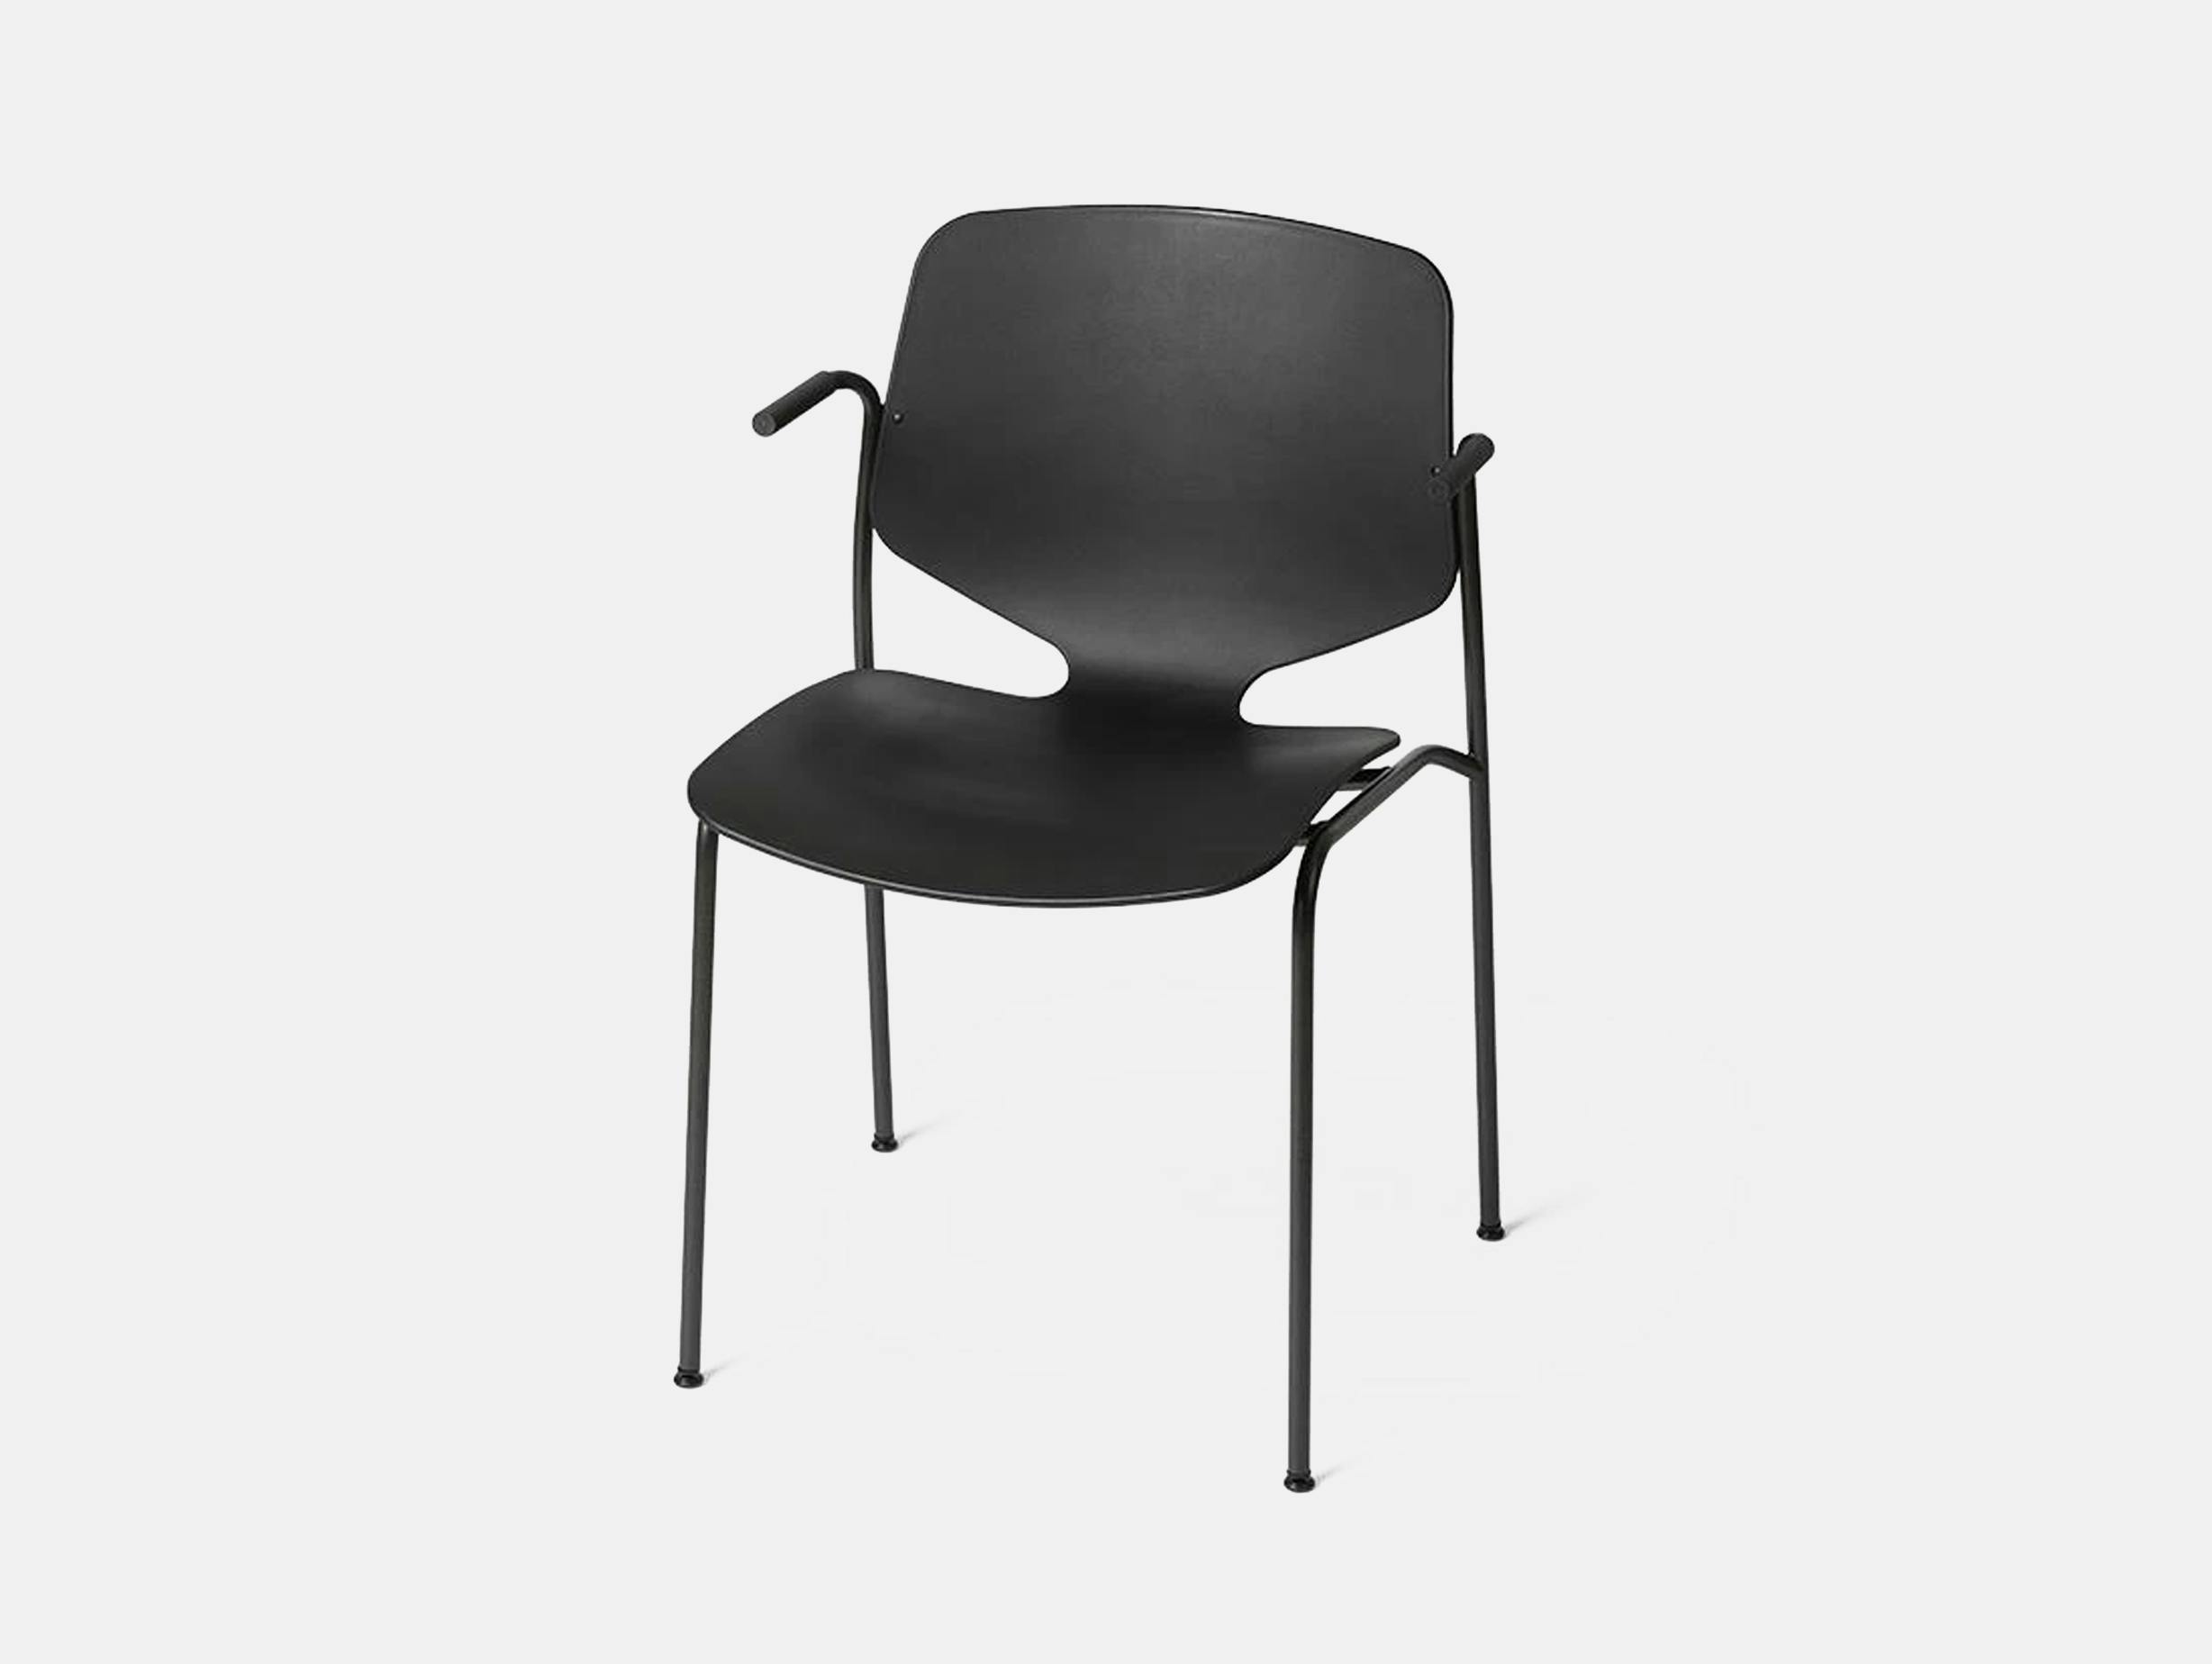 Mater nova sea chair with arms